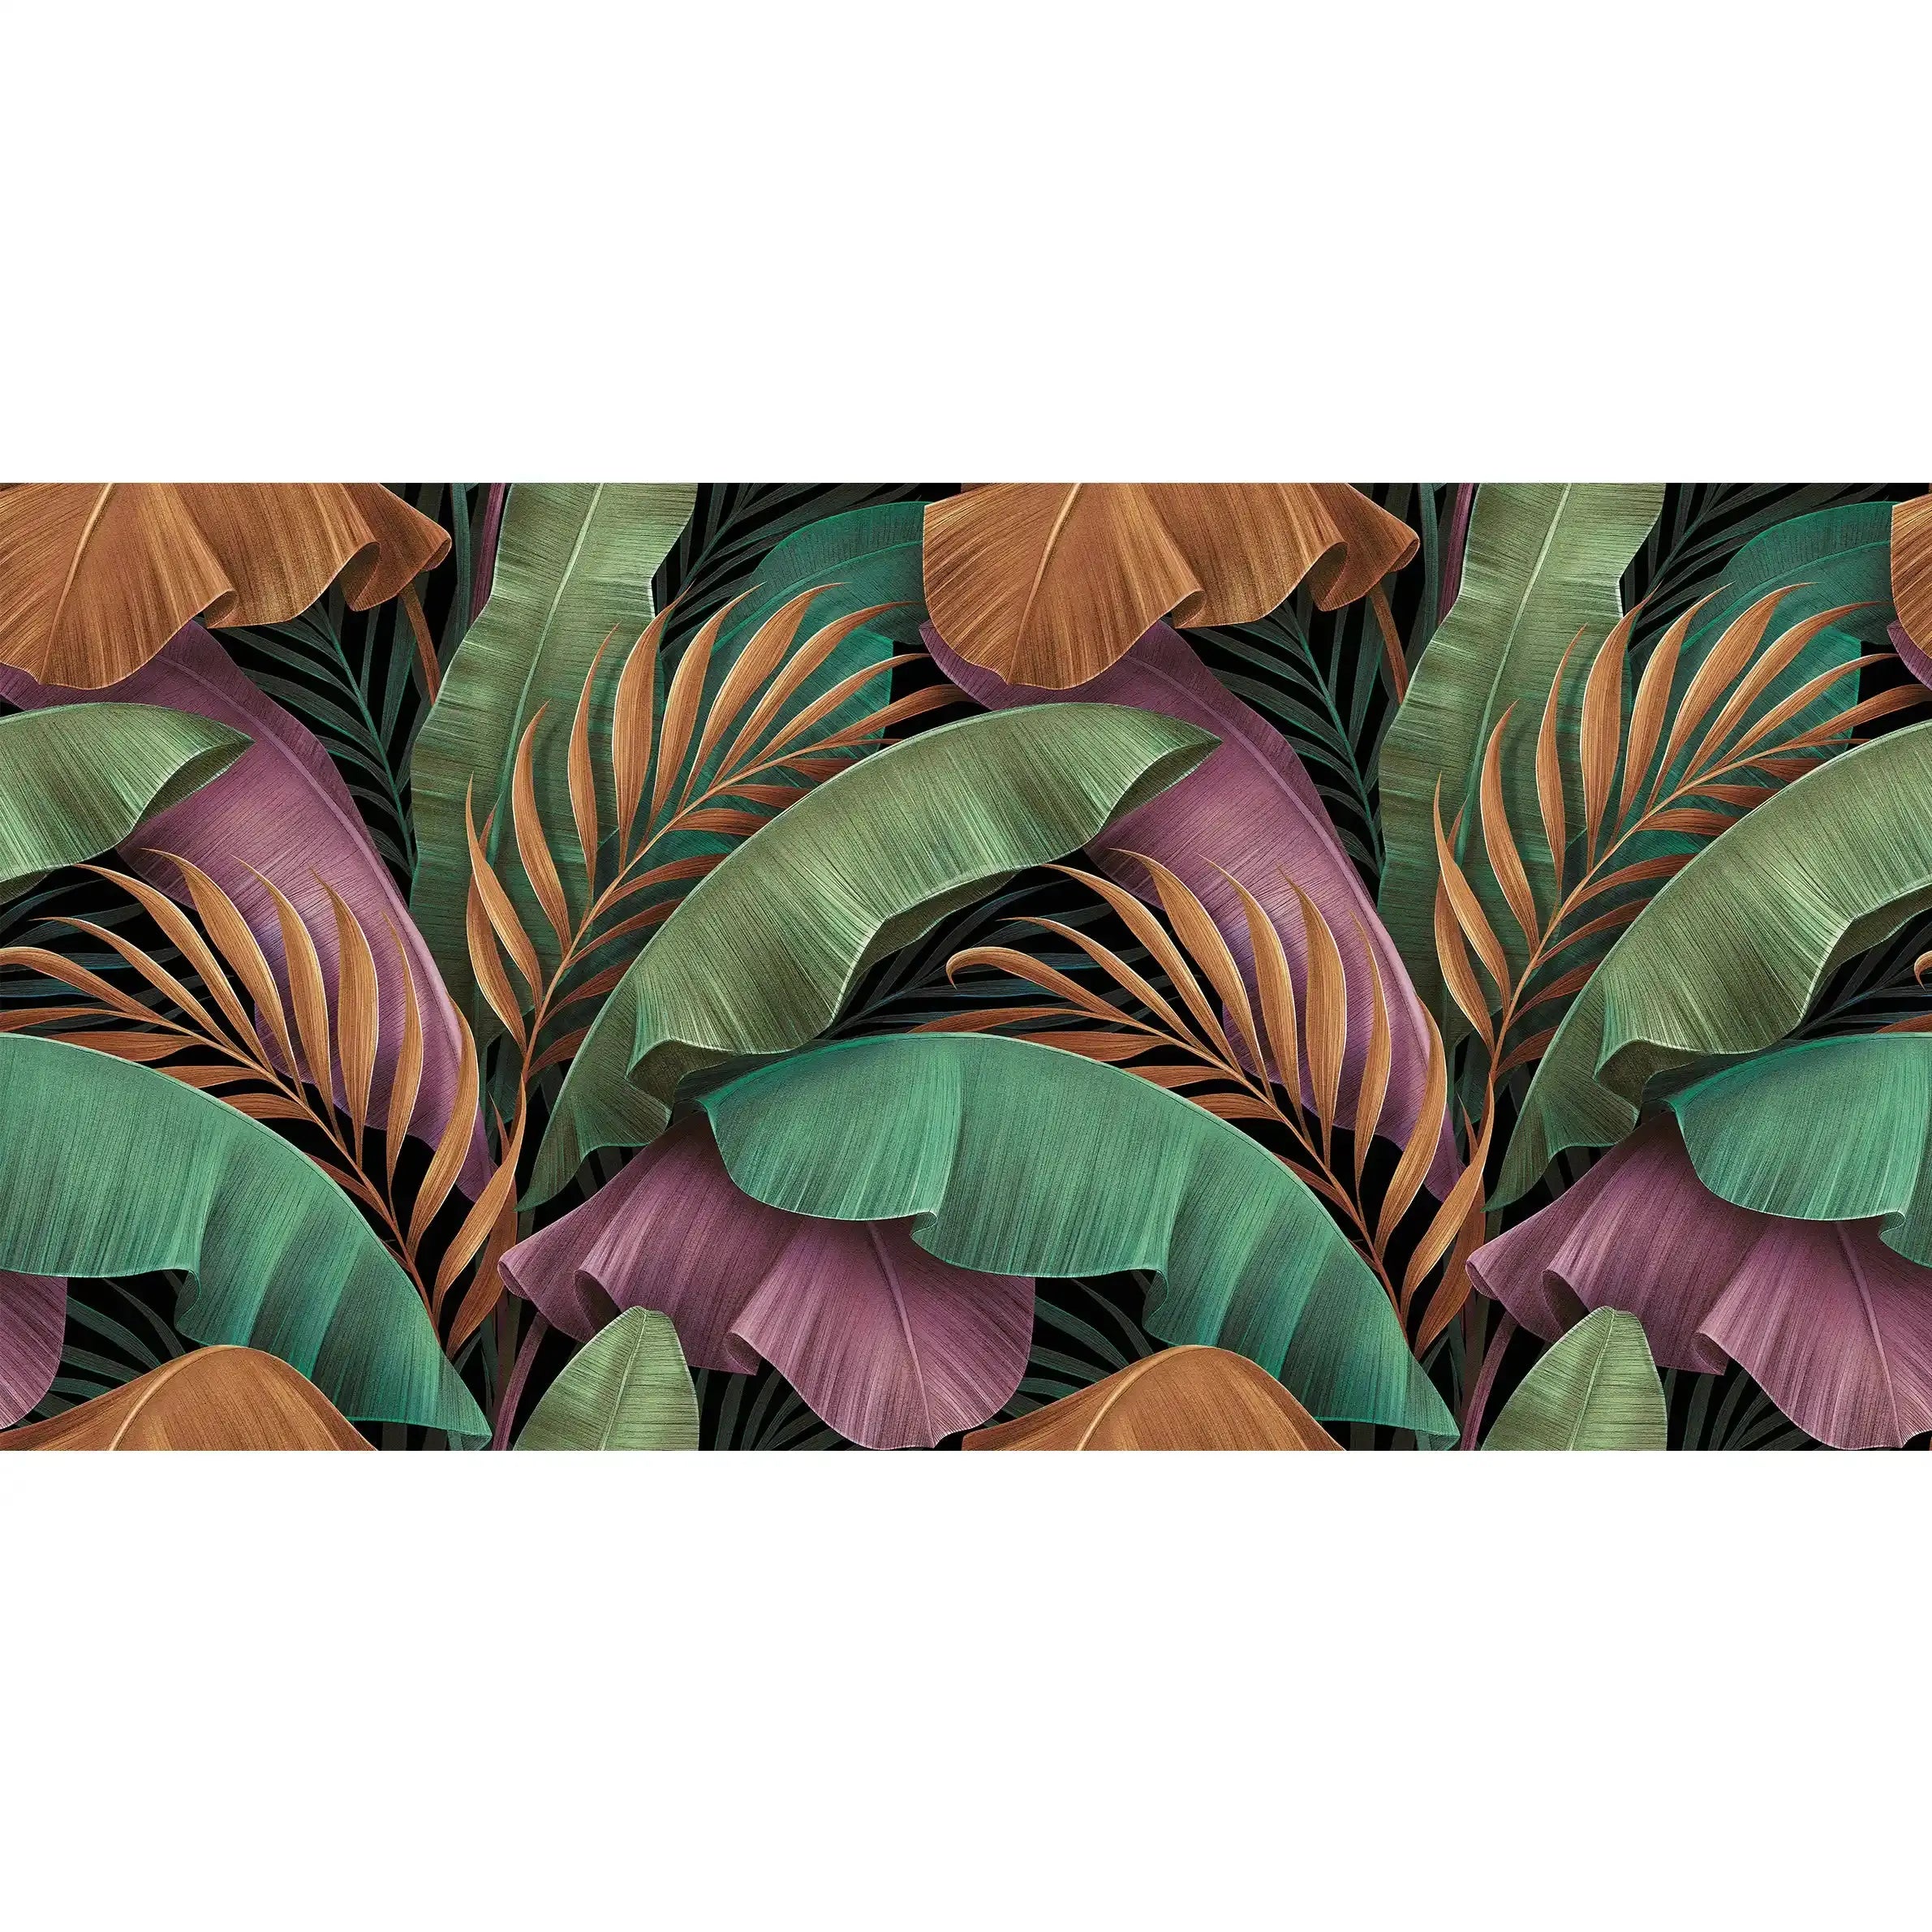 3075-B / Peel and Stick Boho Wallpaper: Tropical Palm Leave Design, Perfect for Accent Wall Decor - Artevella